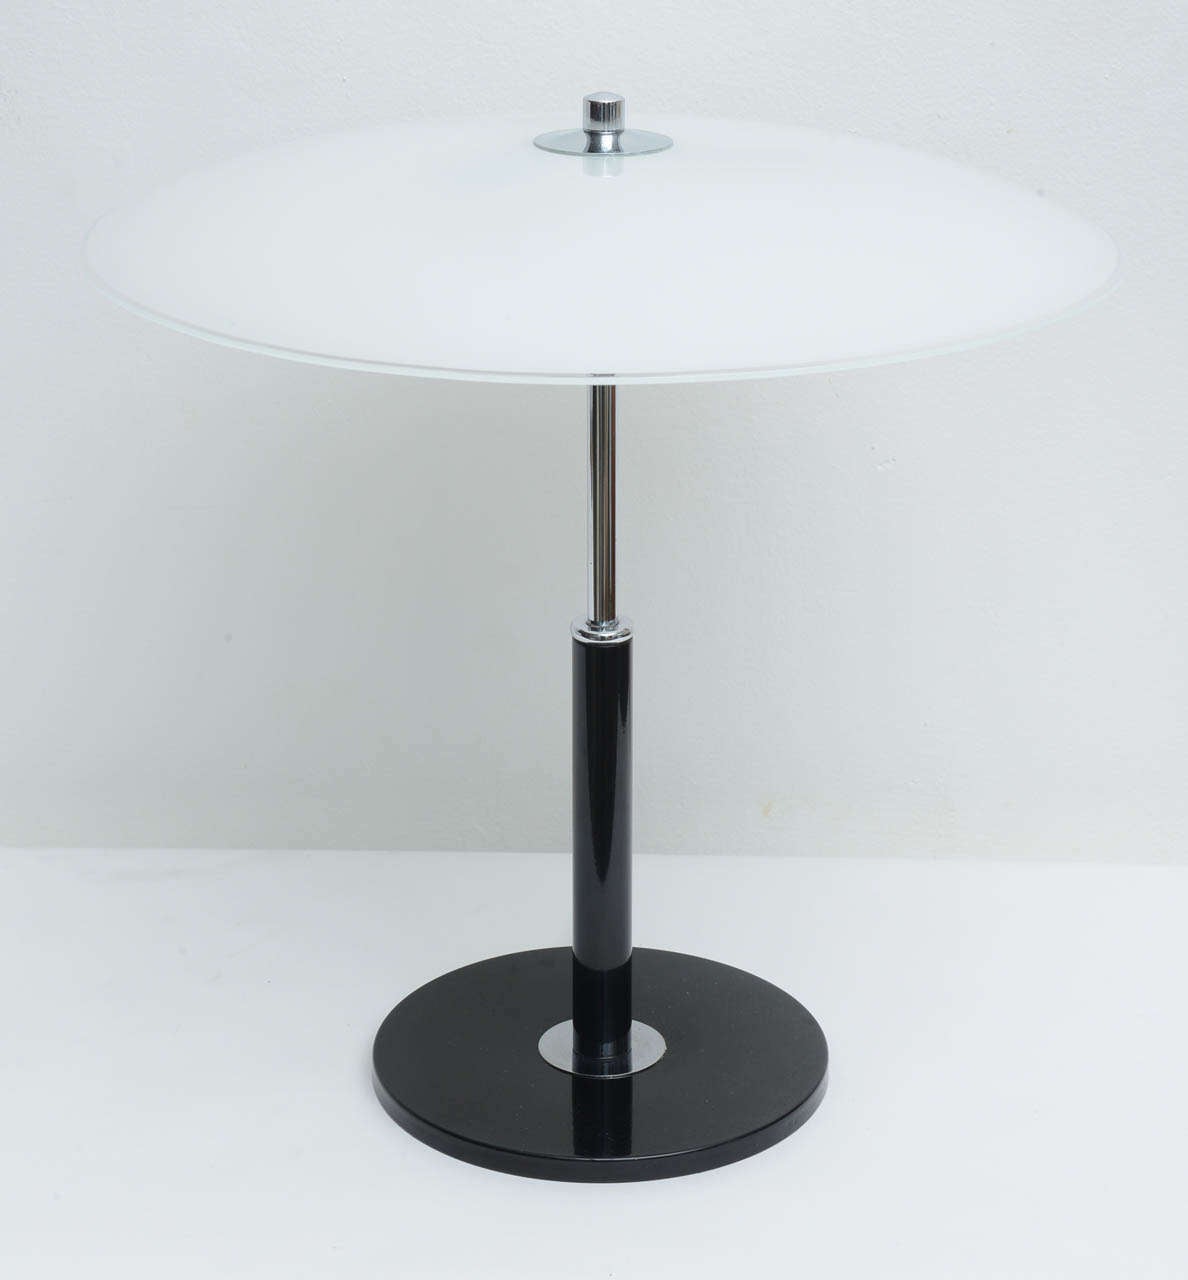 This simple and minimalist lamps have a leather stem and glass shade , metal base . They are all original and date to 70,s . They have an Arteluce or arredoluce design quality to them .